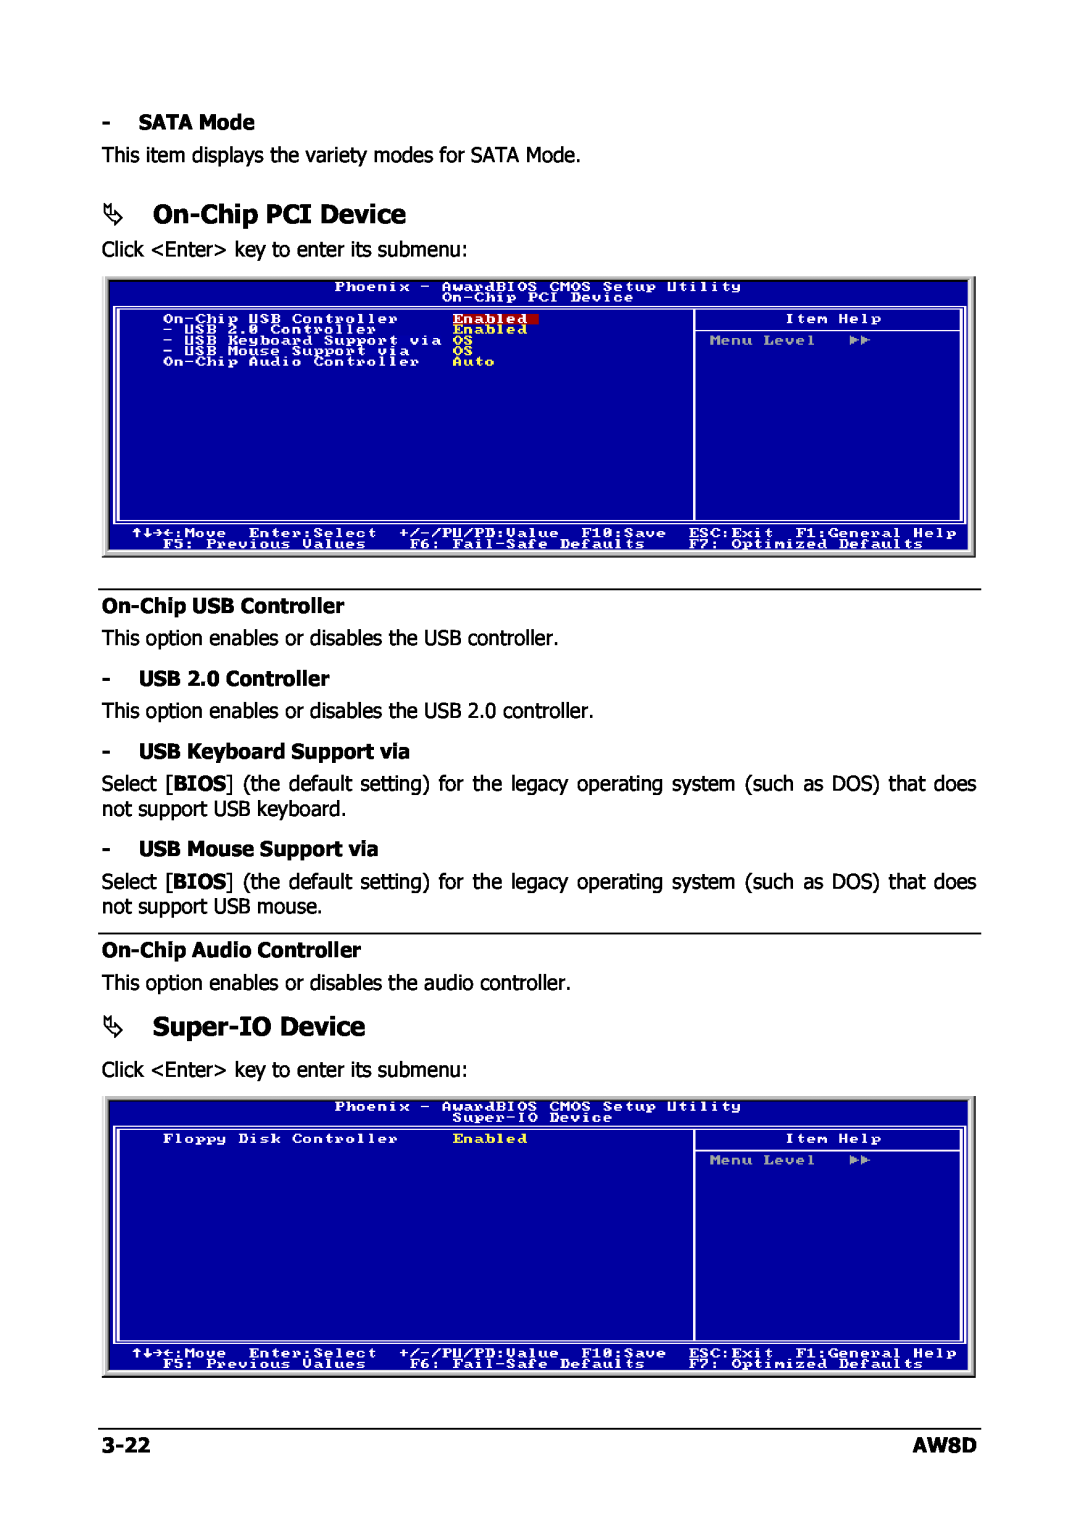 Intel AW8D user manual On-Chip PCI Device, Super-IO Device 